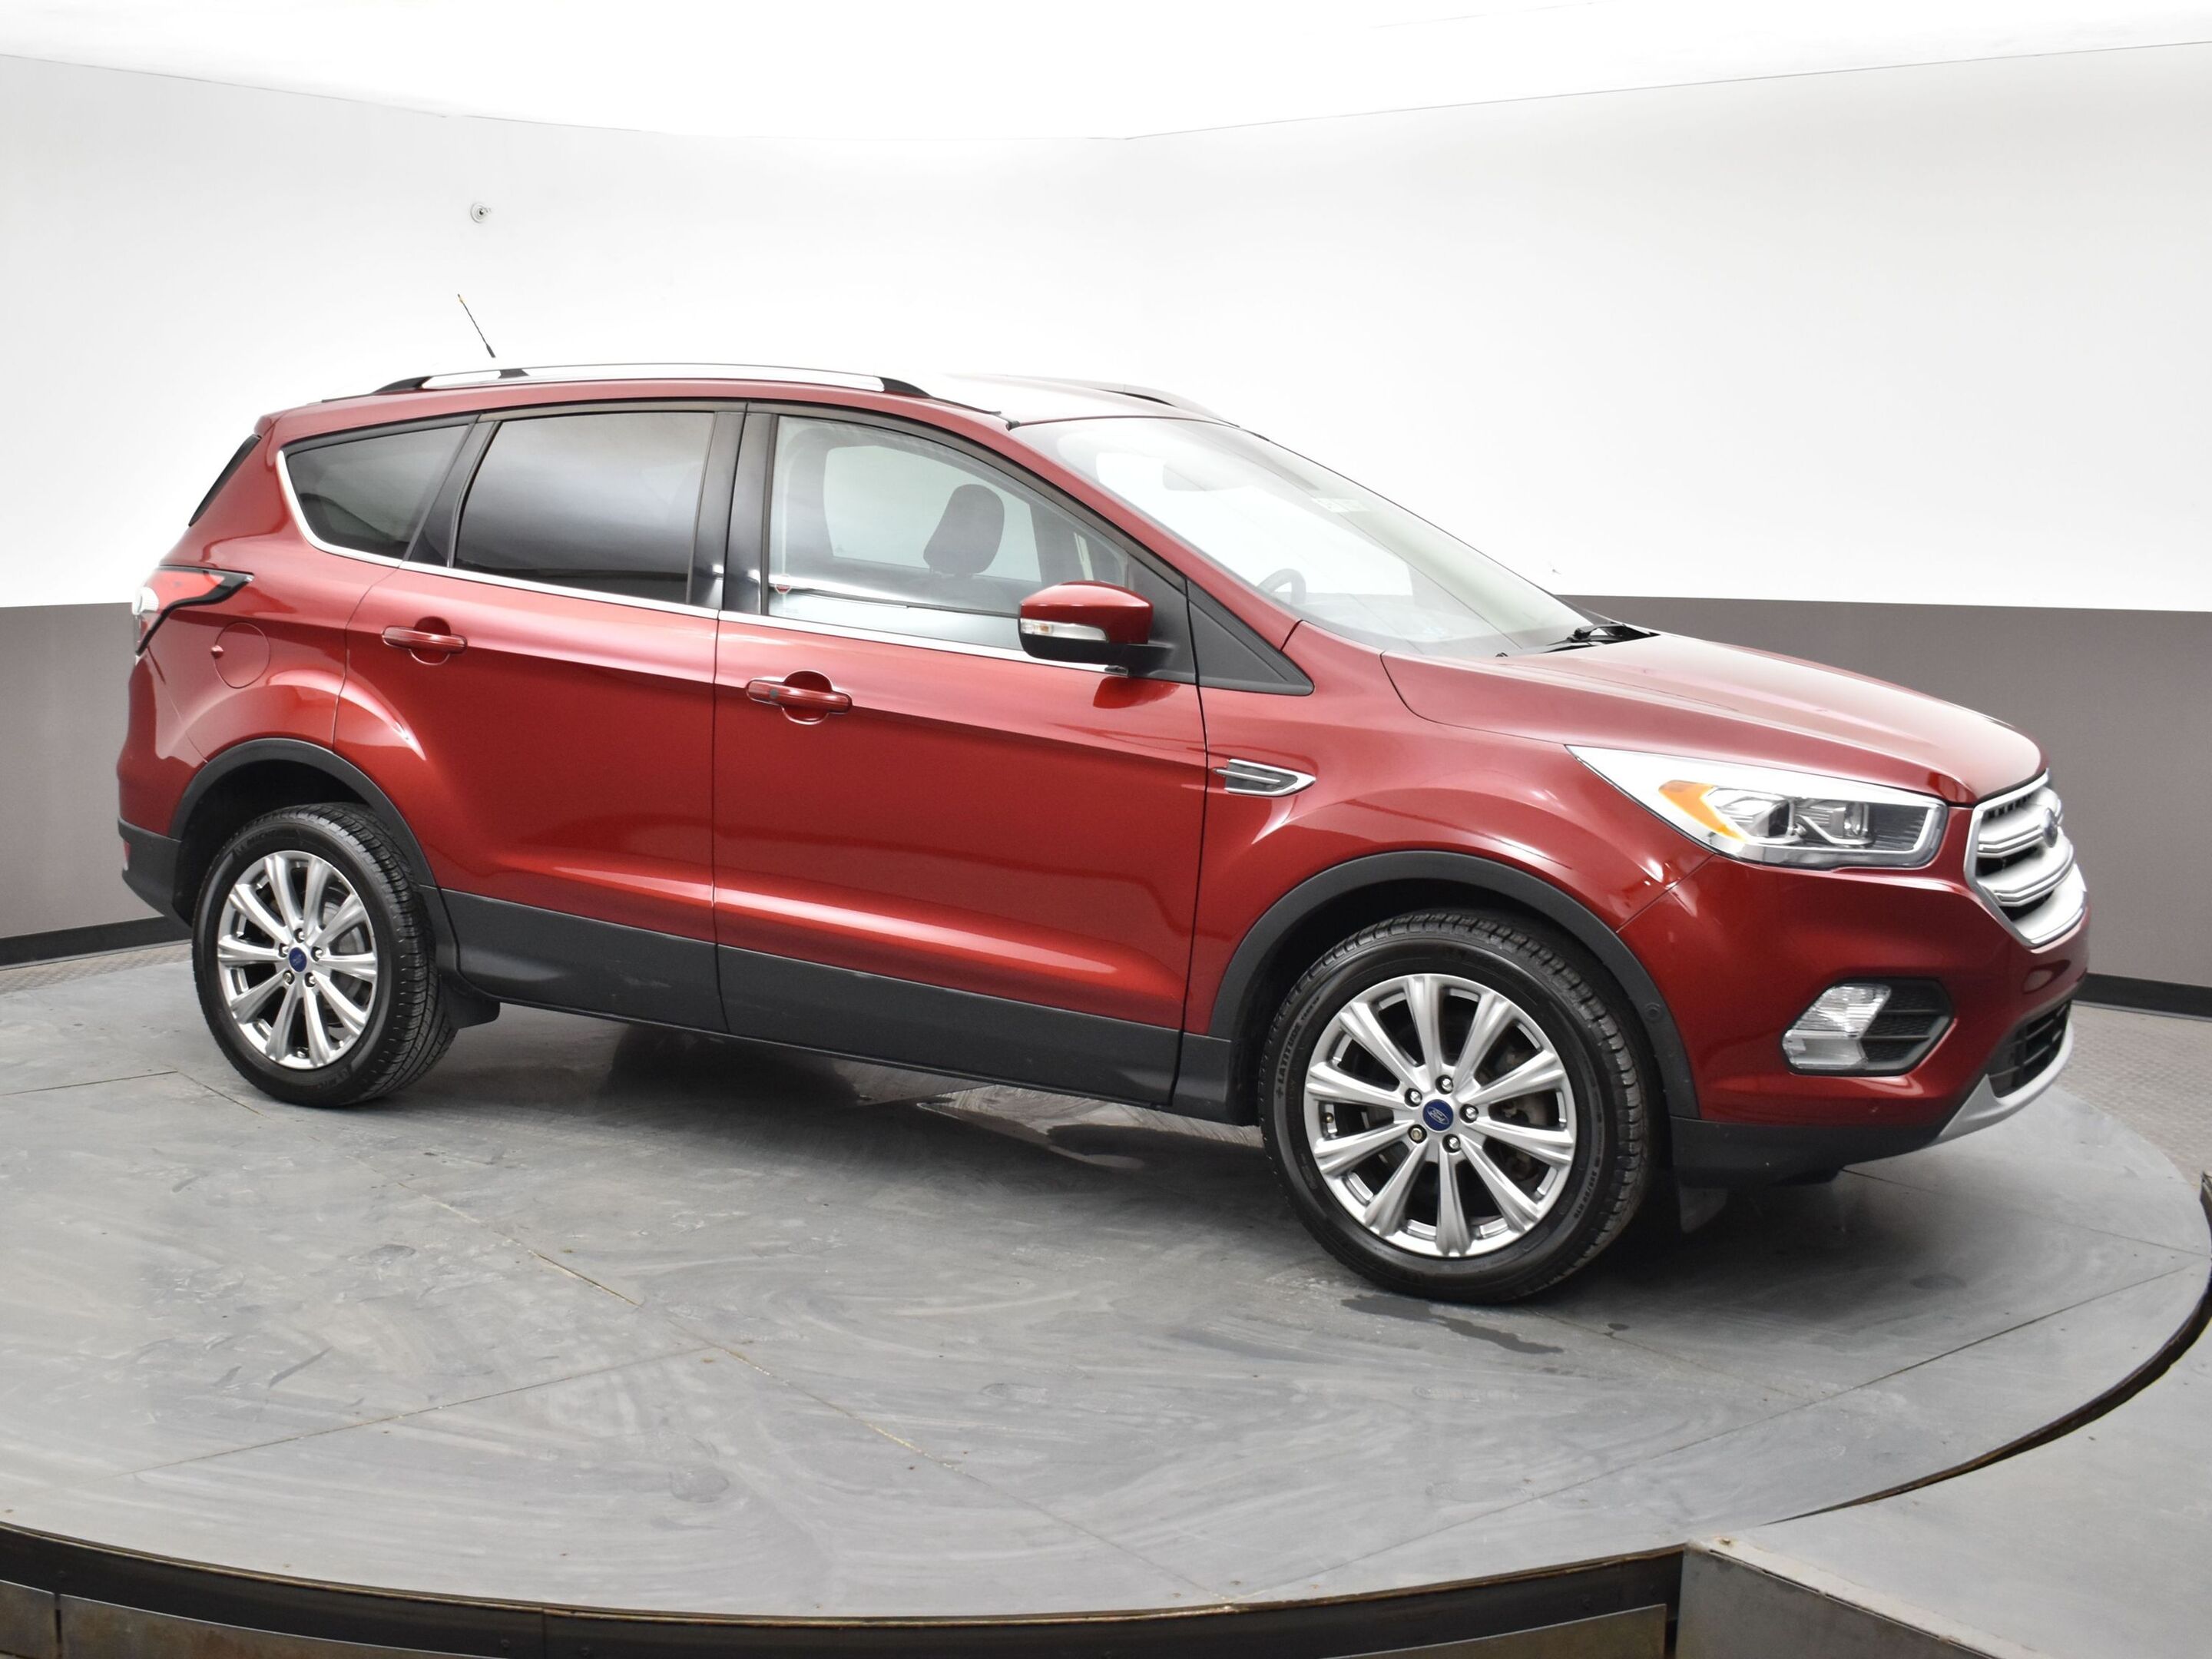 2018 Ford Escape TITANIUM 4WD w/ Only 79K !!! One Owner Just Traded